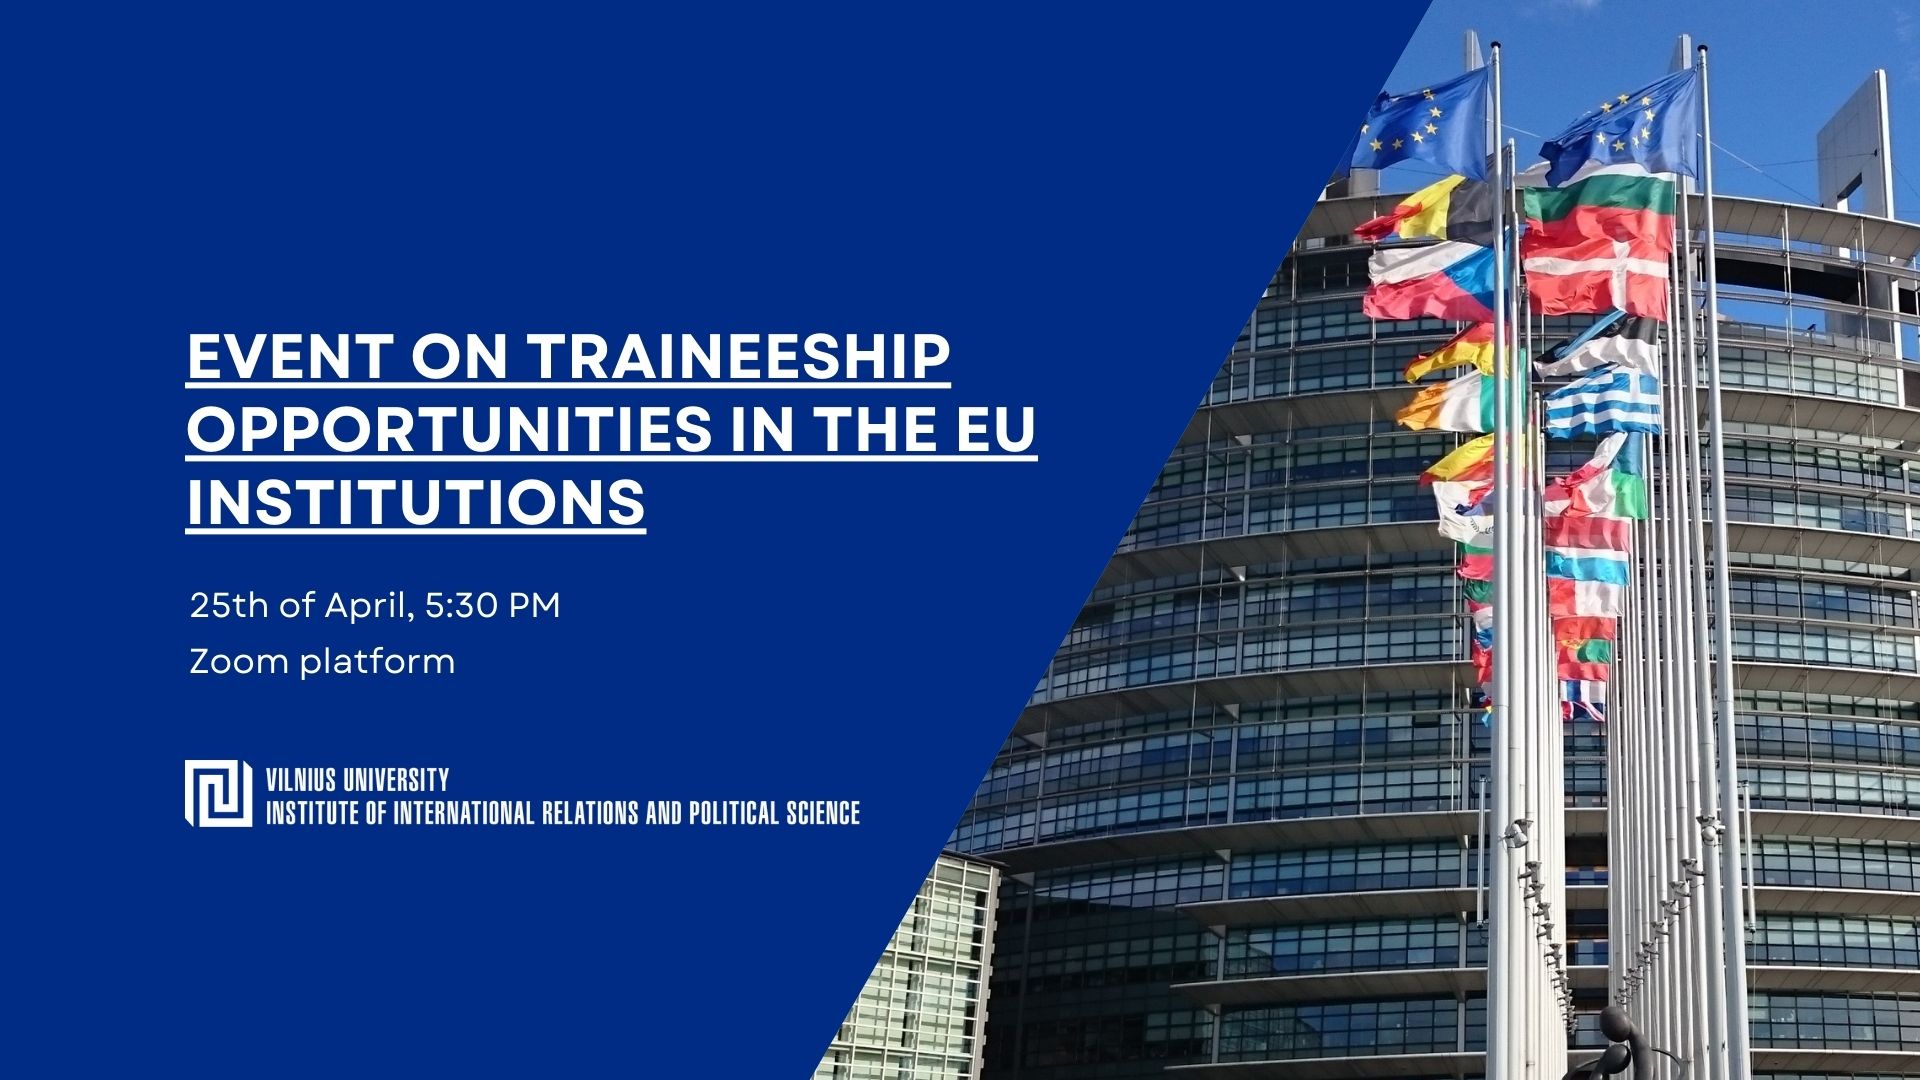 Event on traineeship opportunities in the EU institutions